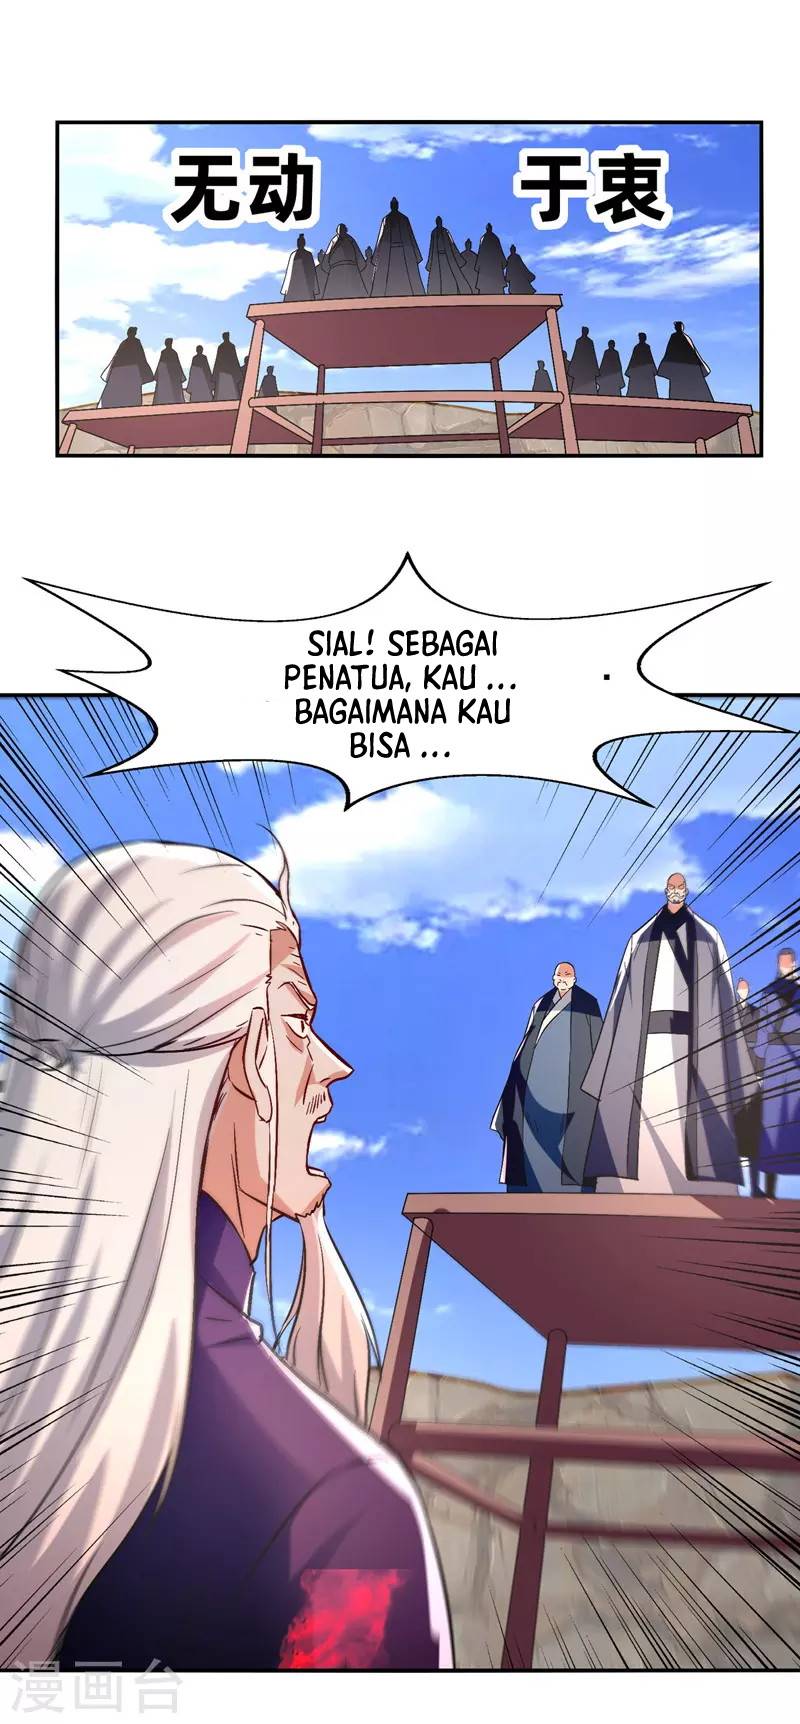 Against The Heaven Supreme (Heaven Guards) Chapter 80 - 187